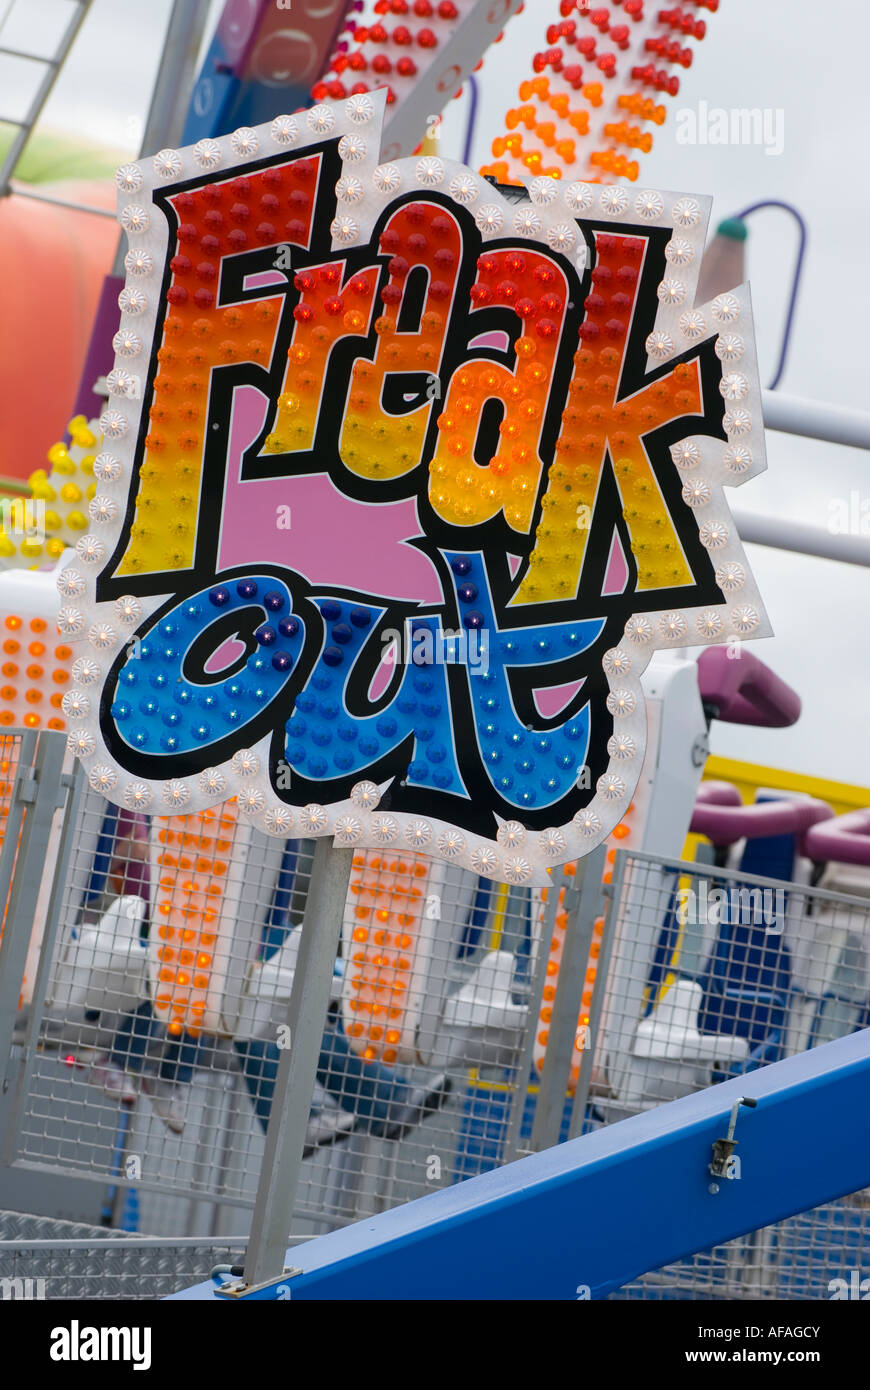 Freak out sing Stock Photo